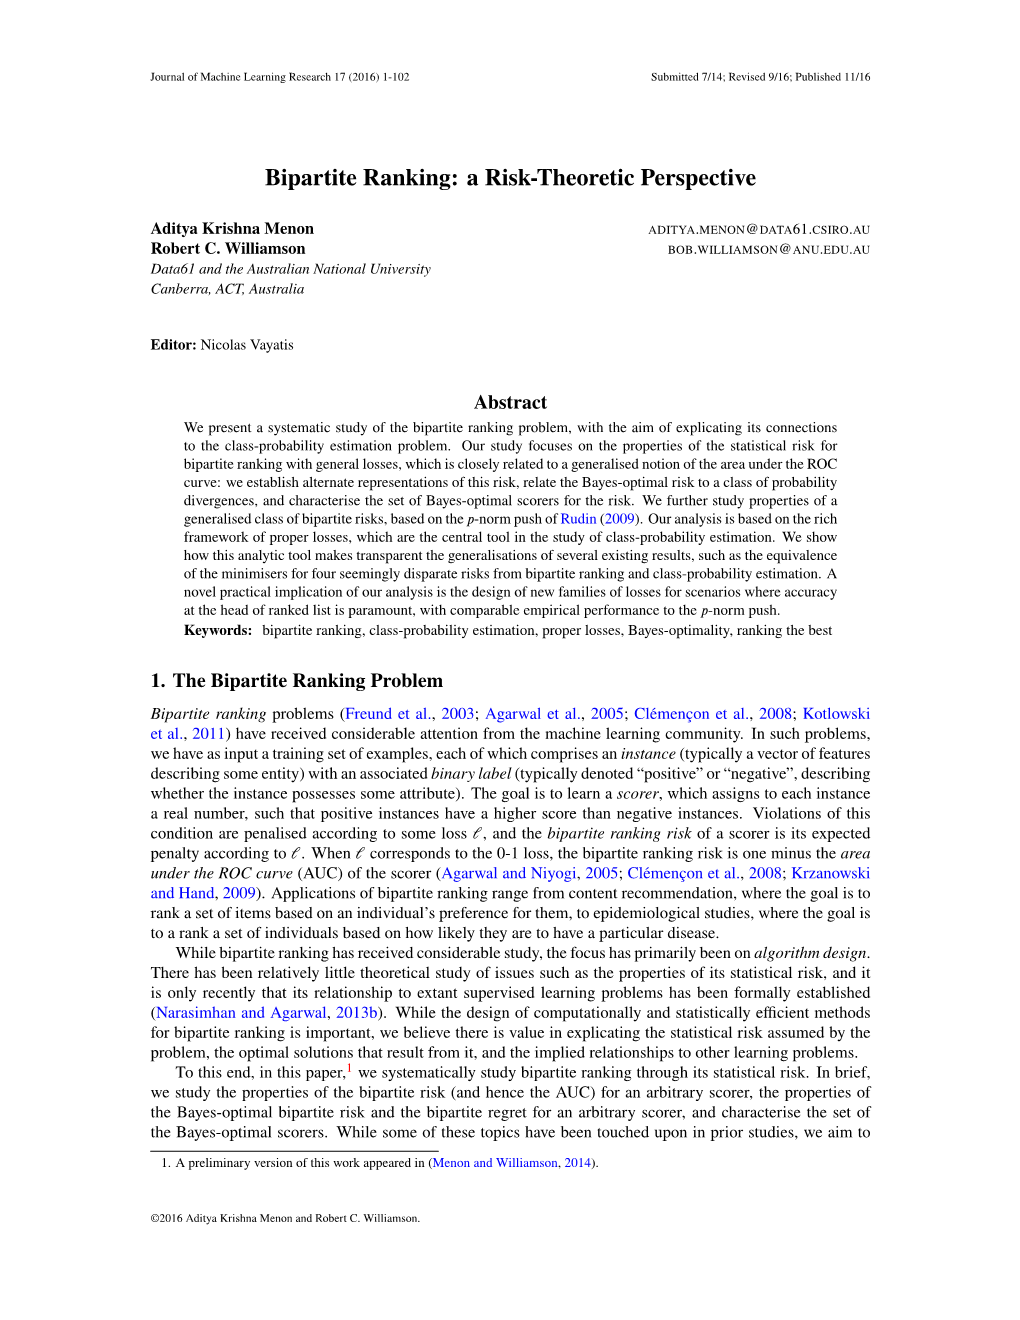 Bipartite Ranking: a Risk-Theoretic Perspective